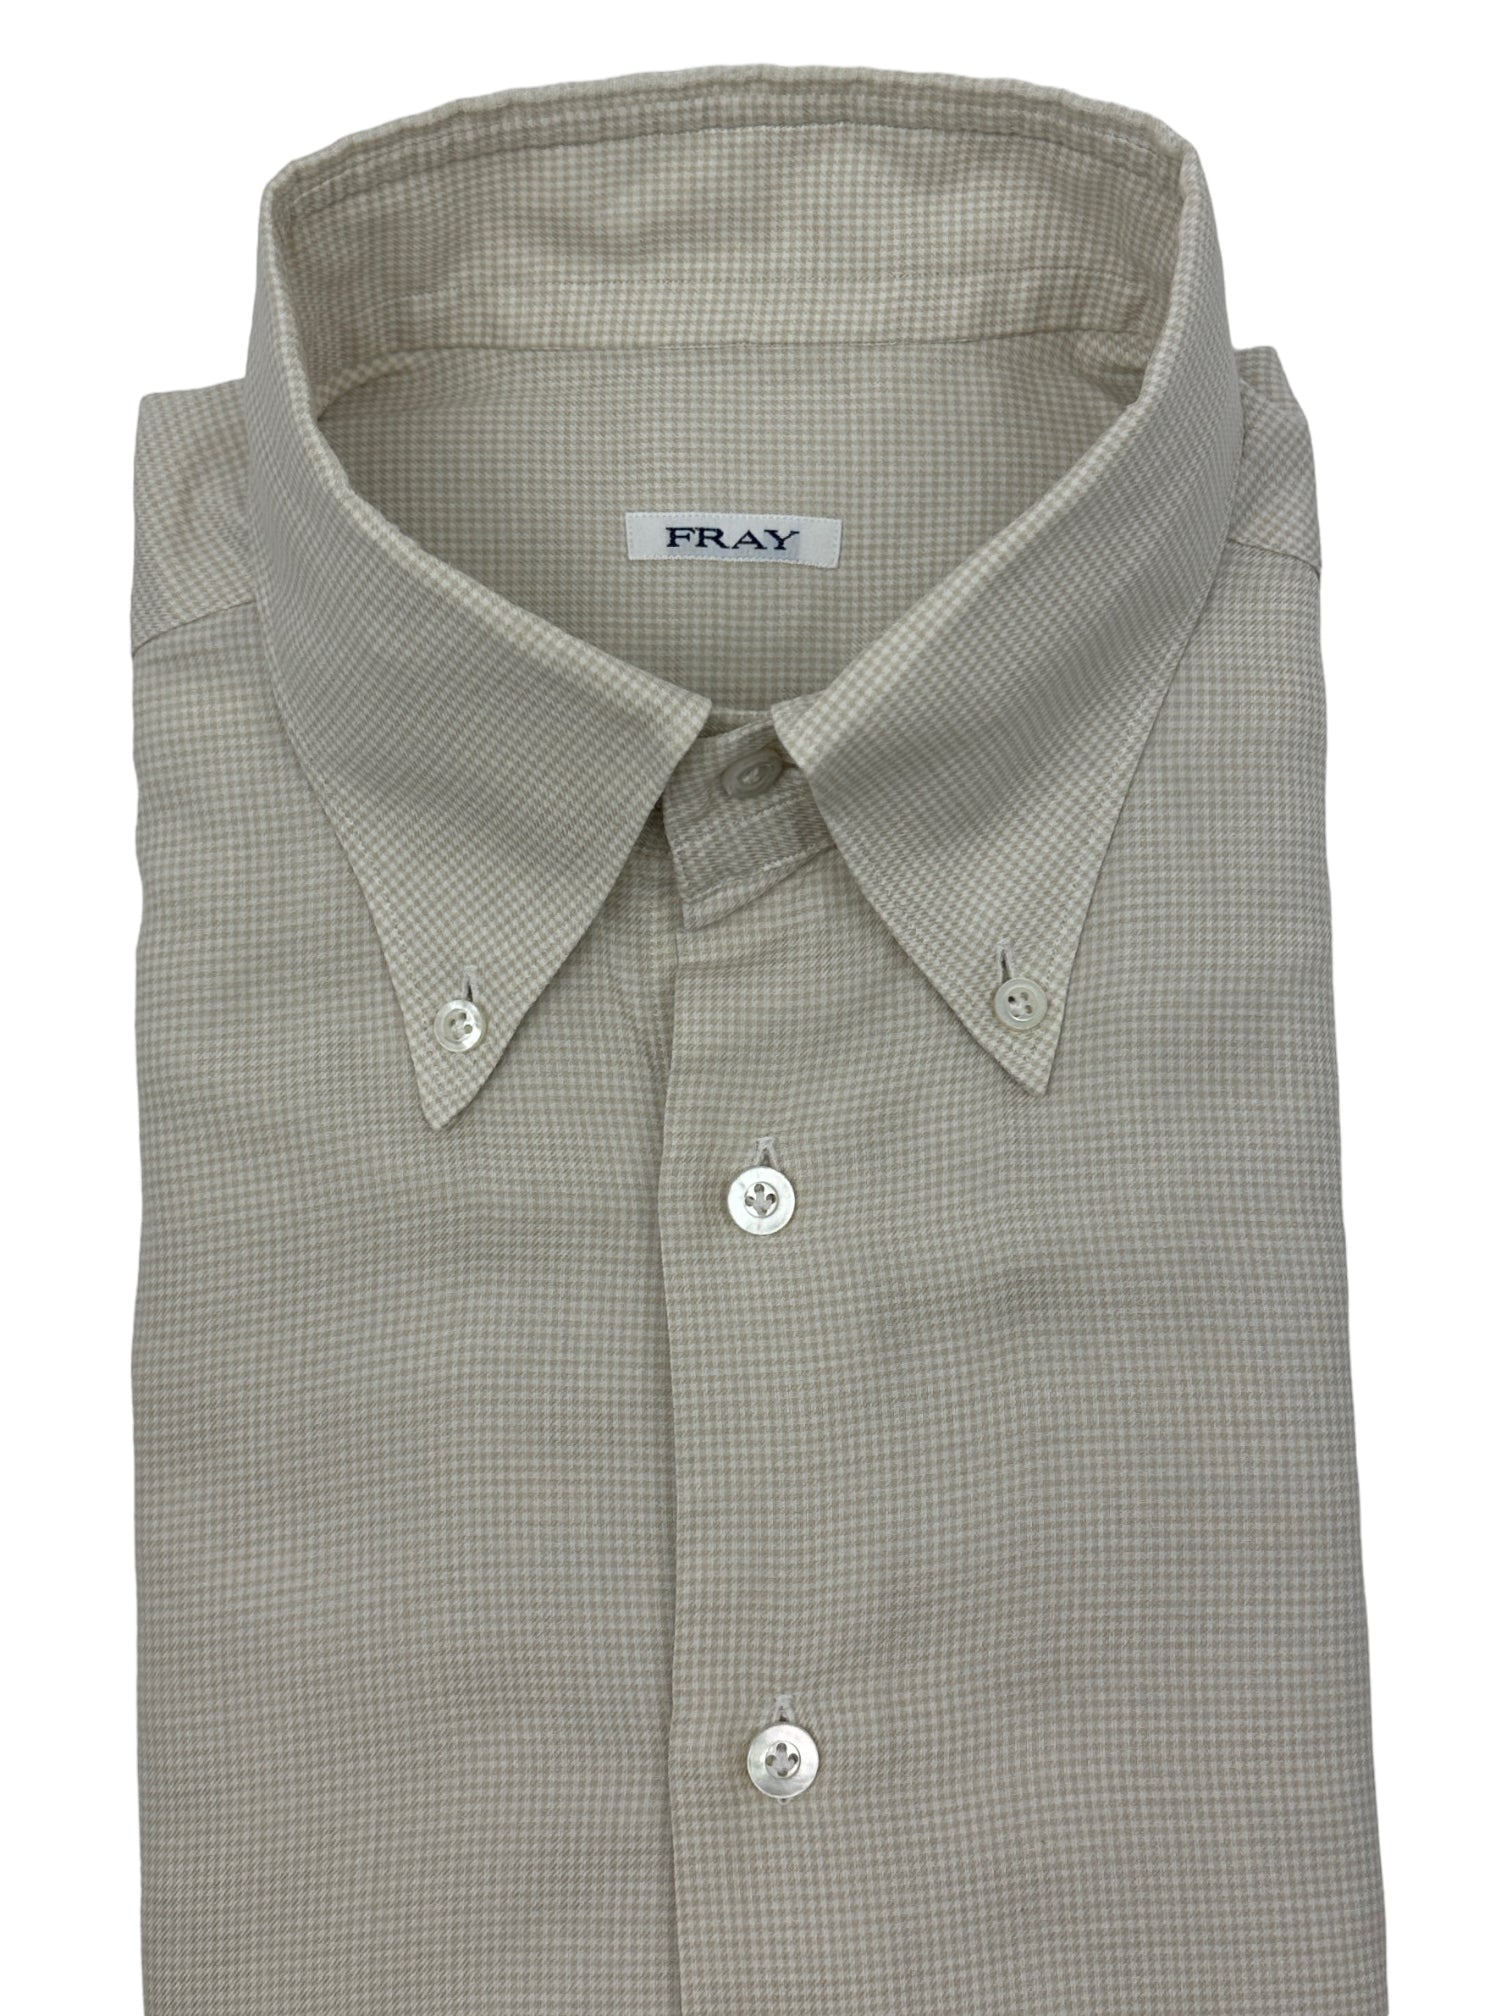 Fray Pale Yellow Puppytooth Shirt